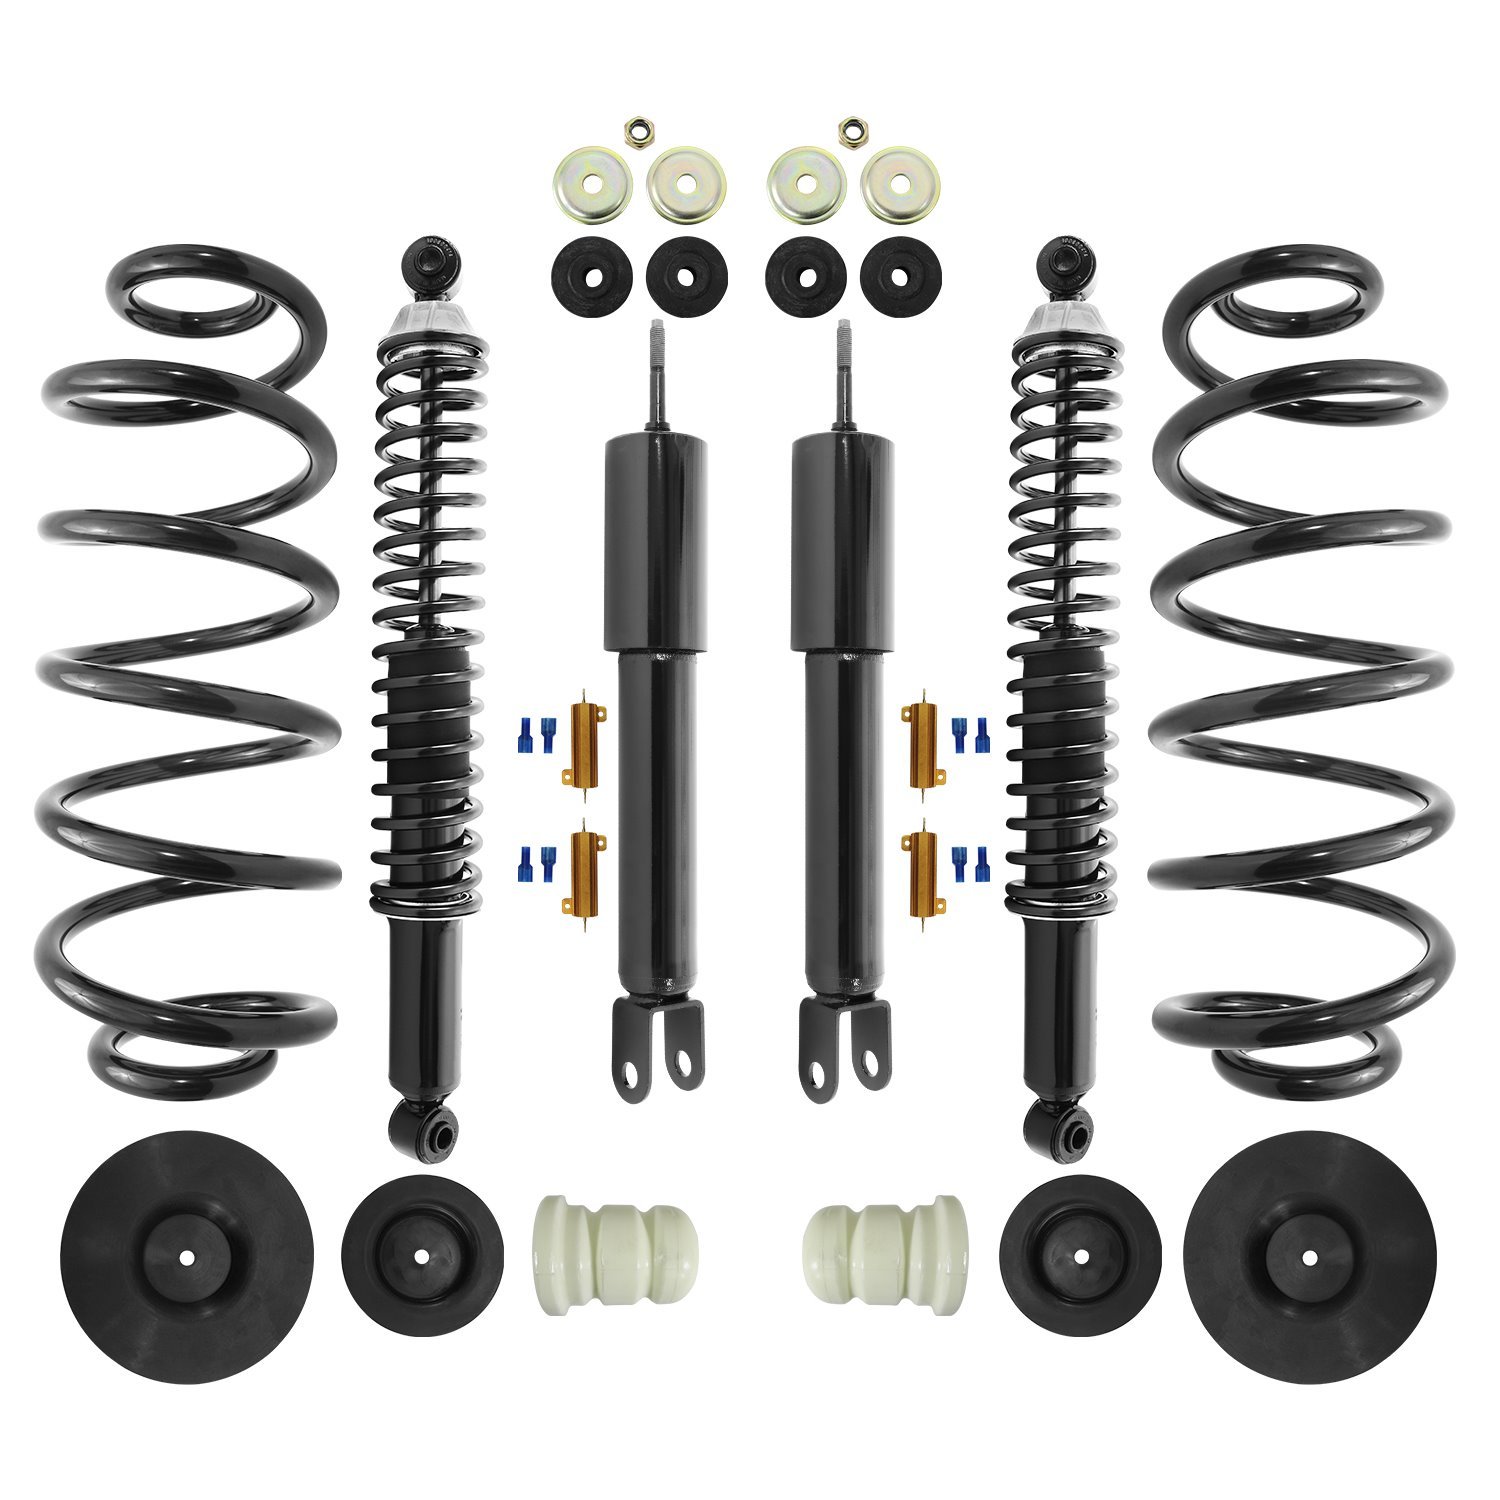 4-30-515000 Air Spring To Coil Spring Conversion Kit Fits Select Cadillac Escalade, Chevy Tahoe, GMC Yukon